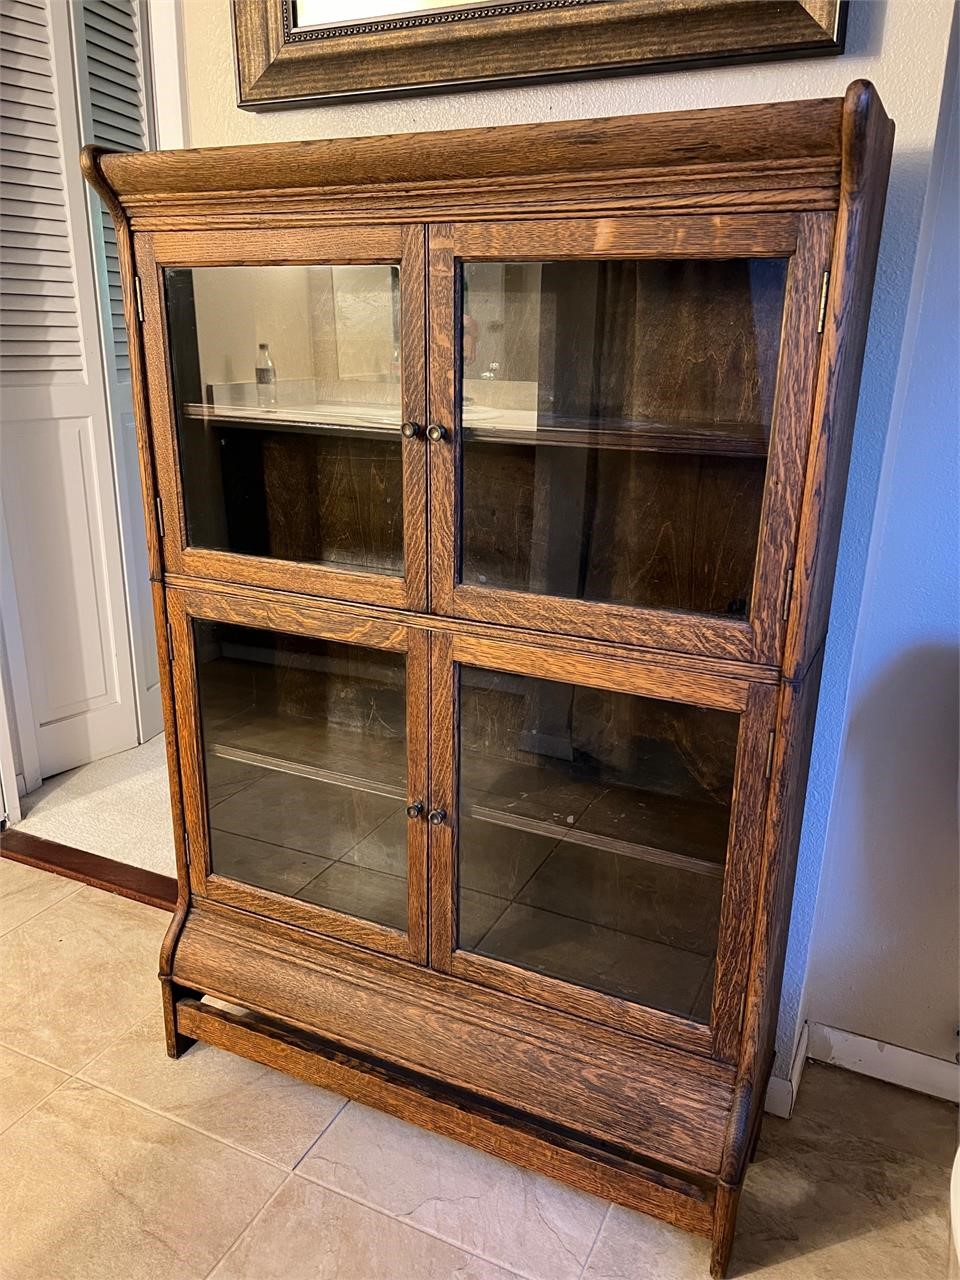 Antique stacking bookcase with glass insert doors